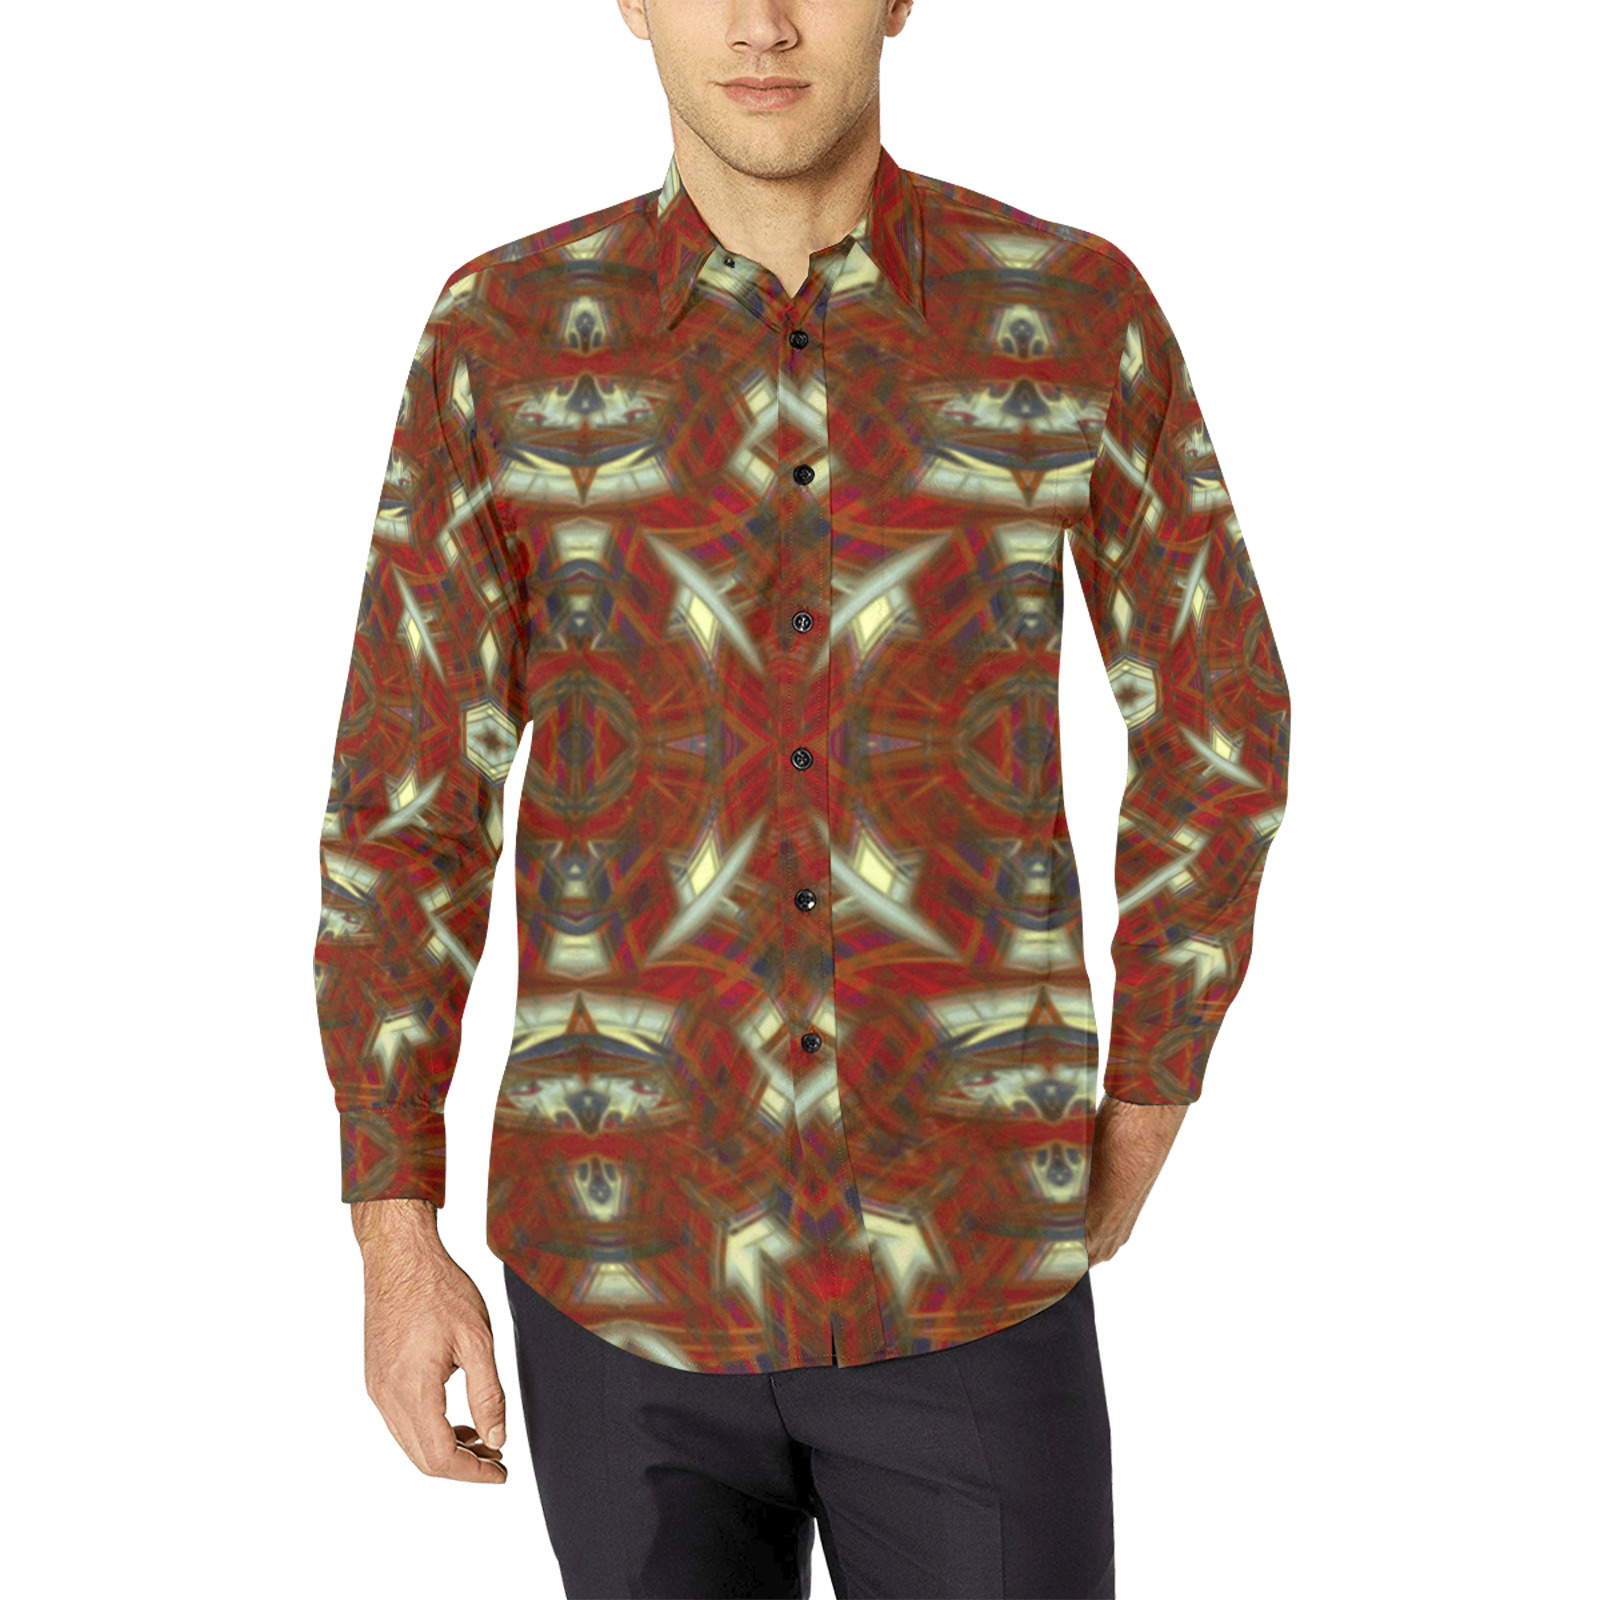 A Deck of Aces - red beige light blue geometric pattern Men's All Over Print Casual Dress Shirt (Model T61)